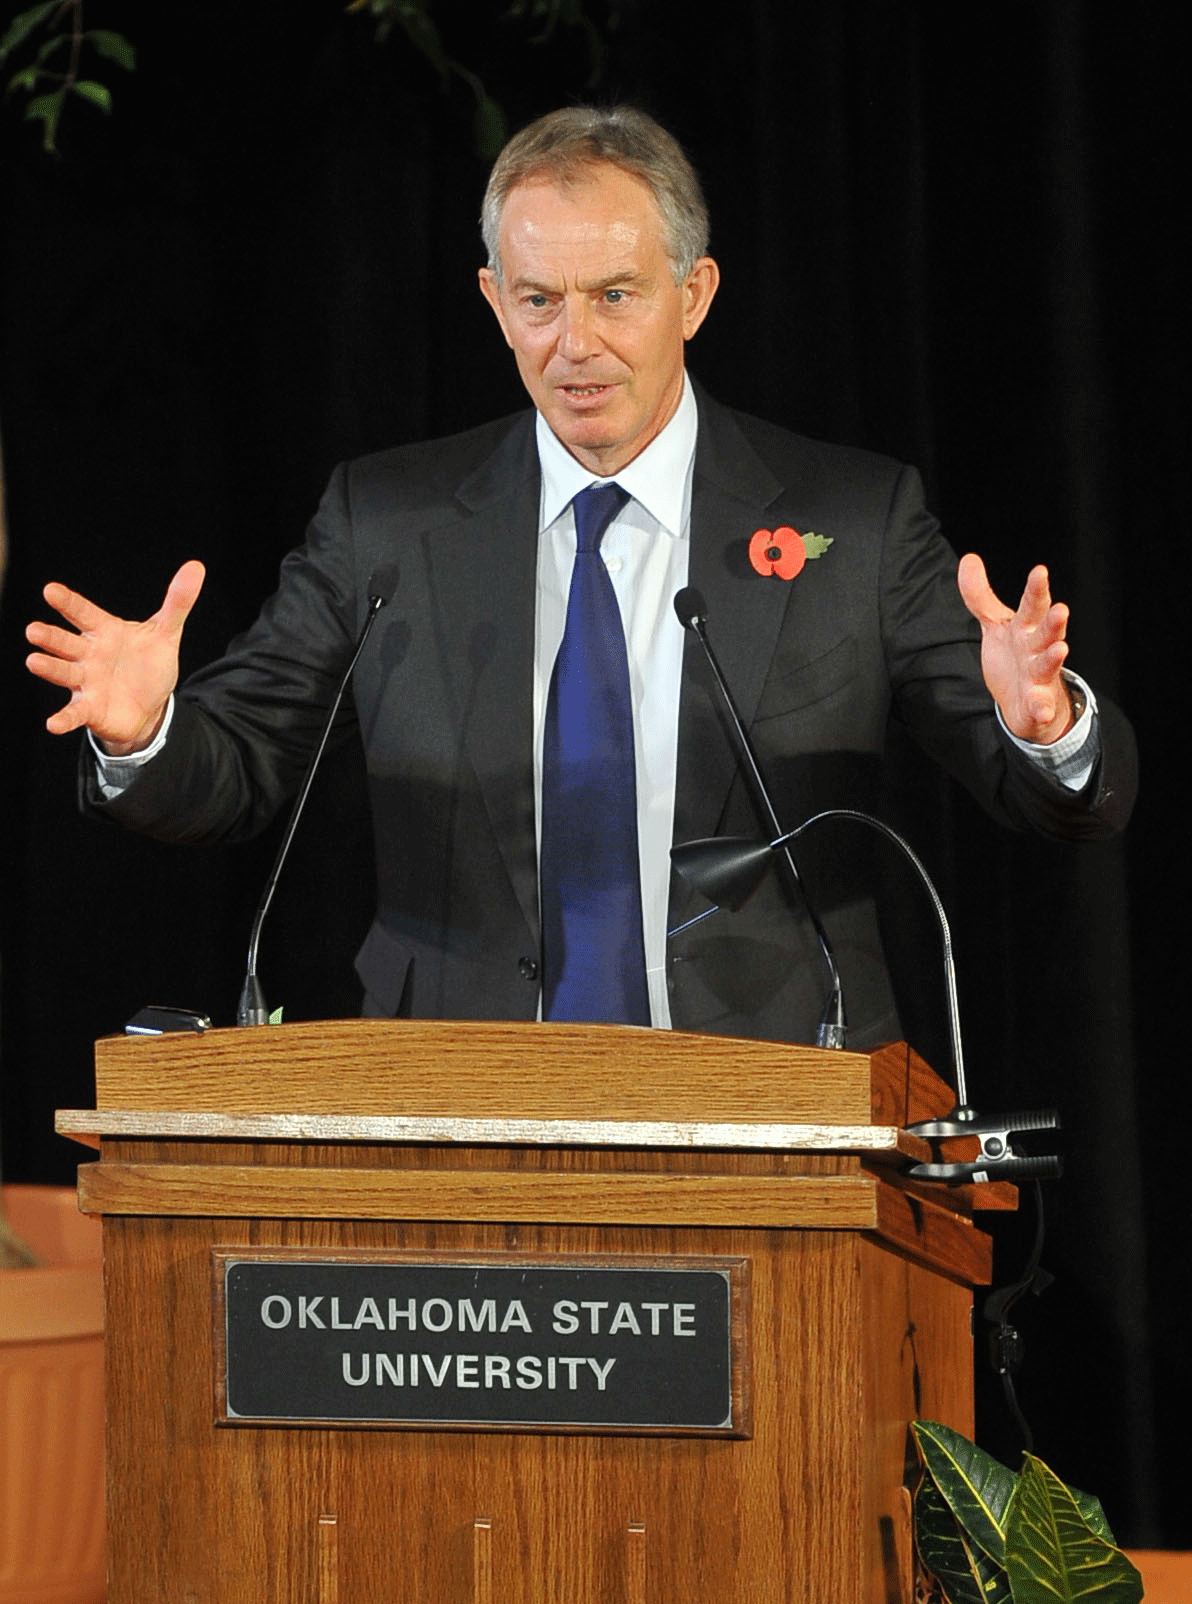 Tony Blair, former prime minister of Great Britain, spoke to crowds in Stillwater, Tulsa and Oklahoma City this week as the guest of Oklahoma State University’s Spears School of Business.